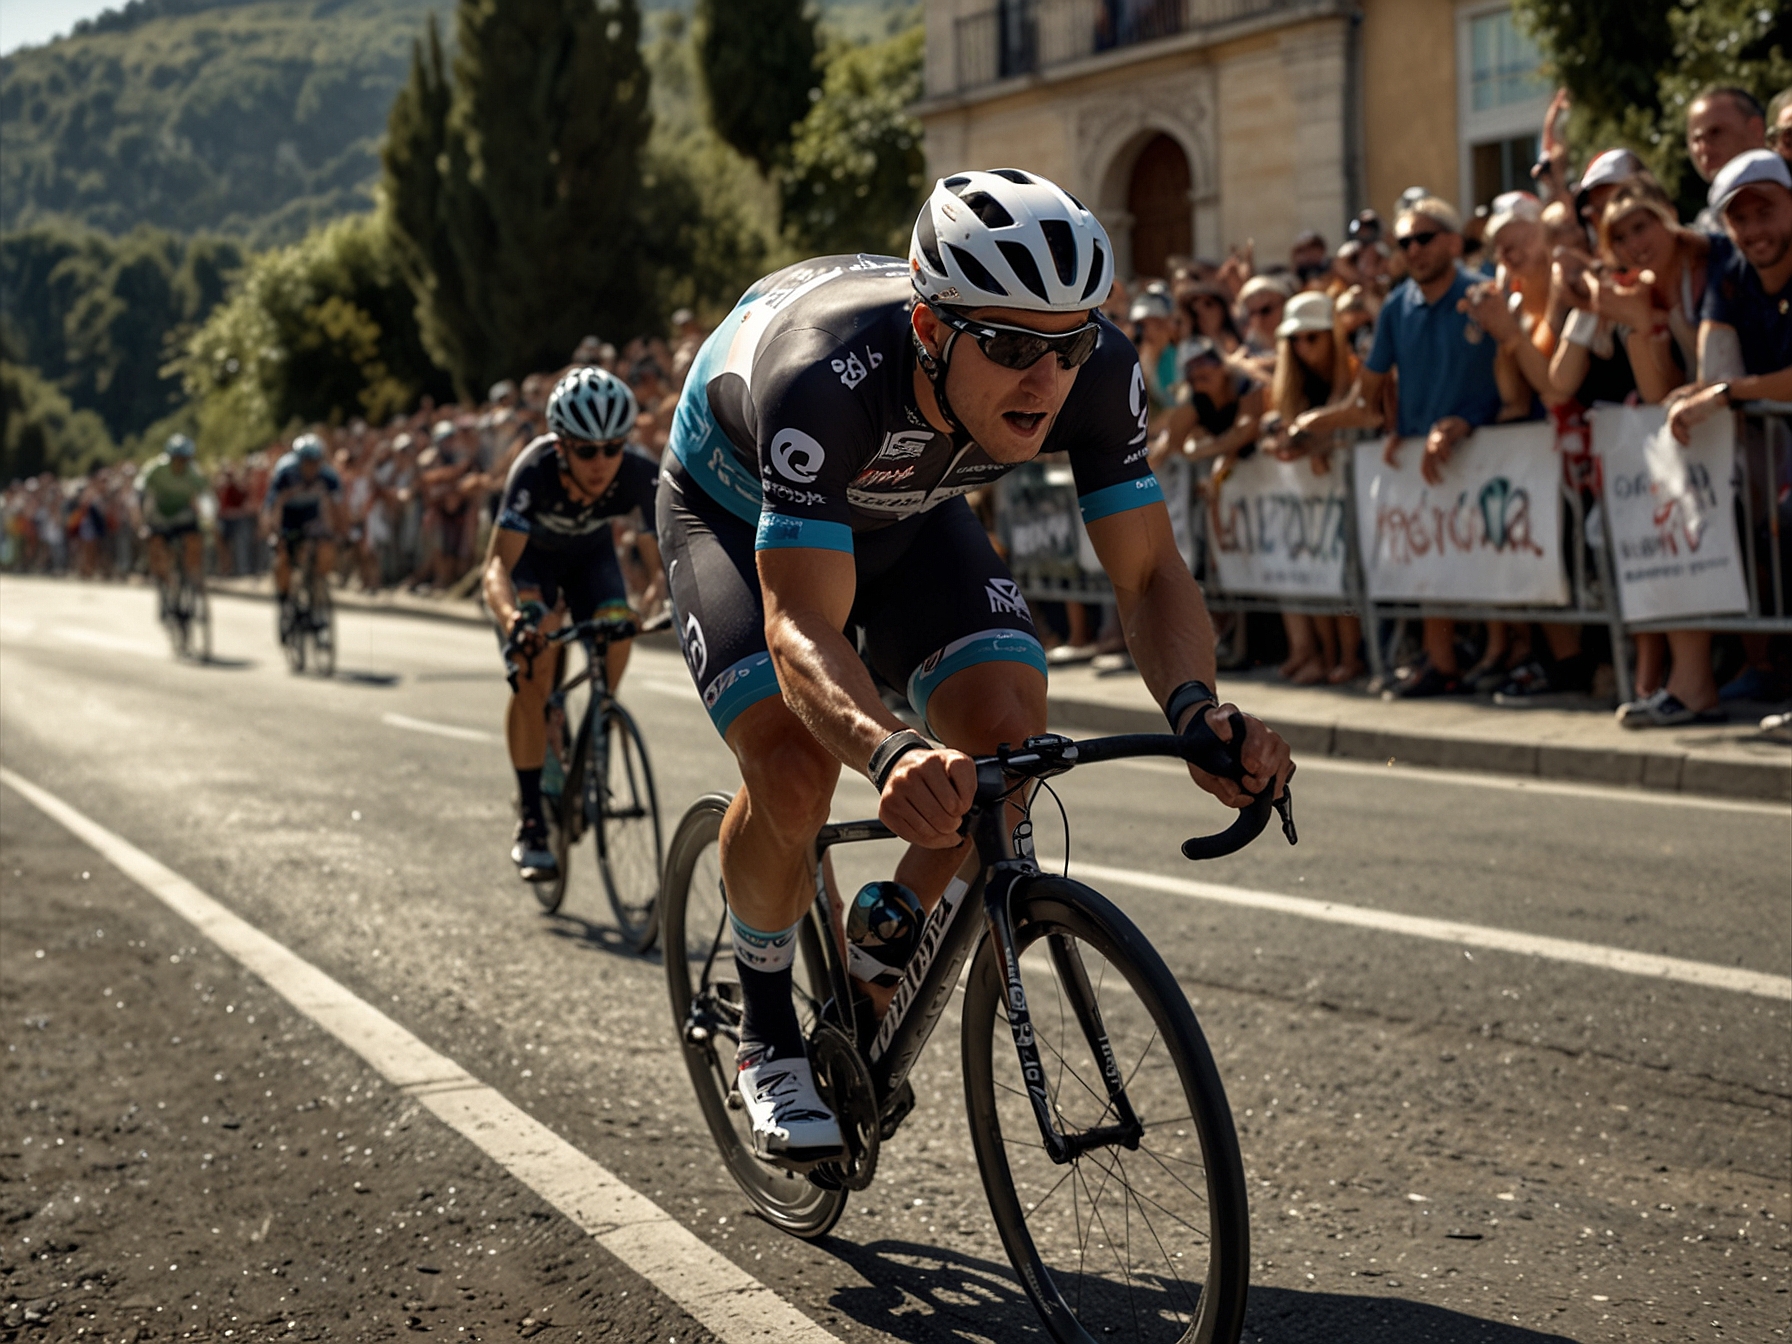 Jonas Vingegaard riding aggressively up the Côte de San Luca during stage 2 of the Tour de France, closely following his rival Tadej Pogačar.